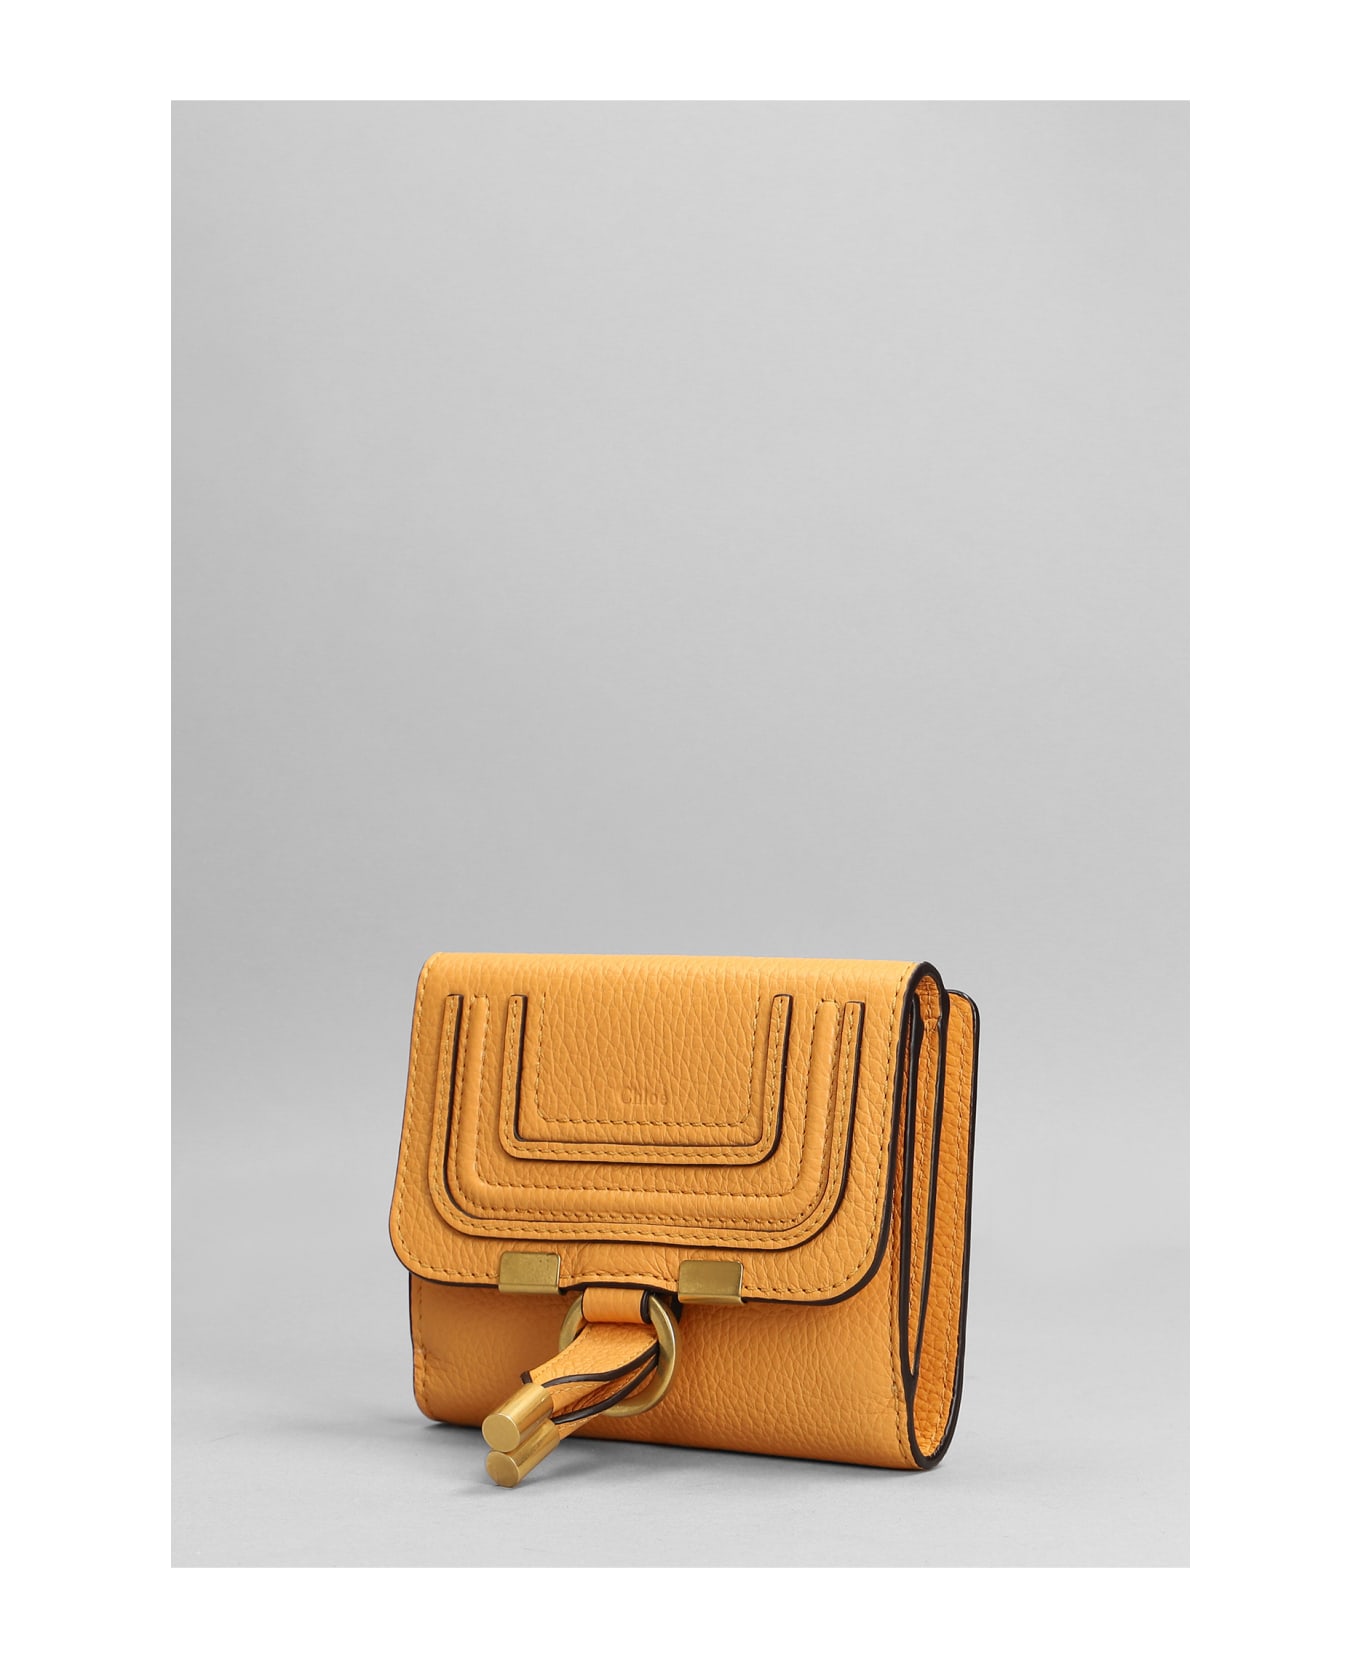 Chloé Marcie Wallet In Yellow Leather - yellow